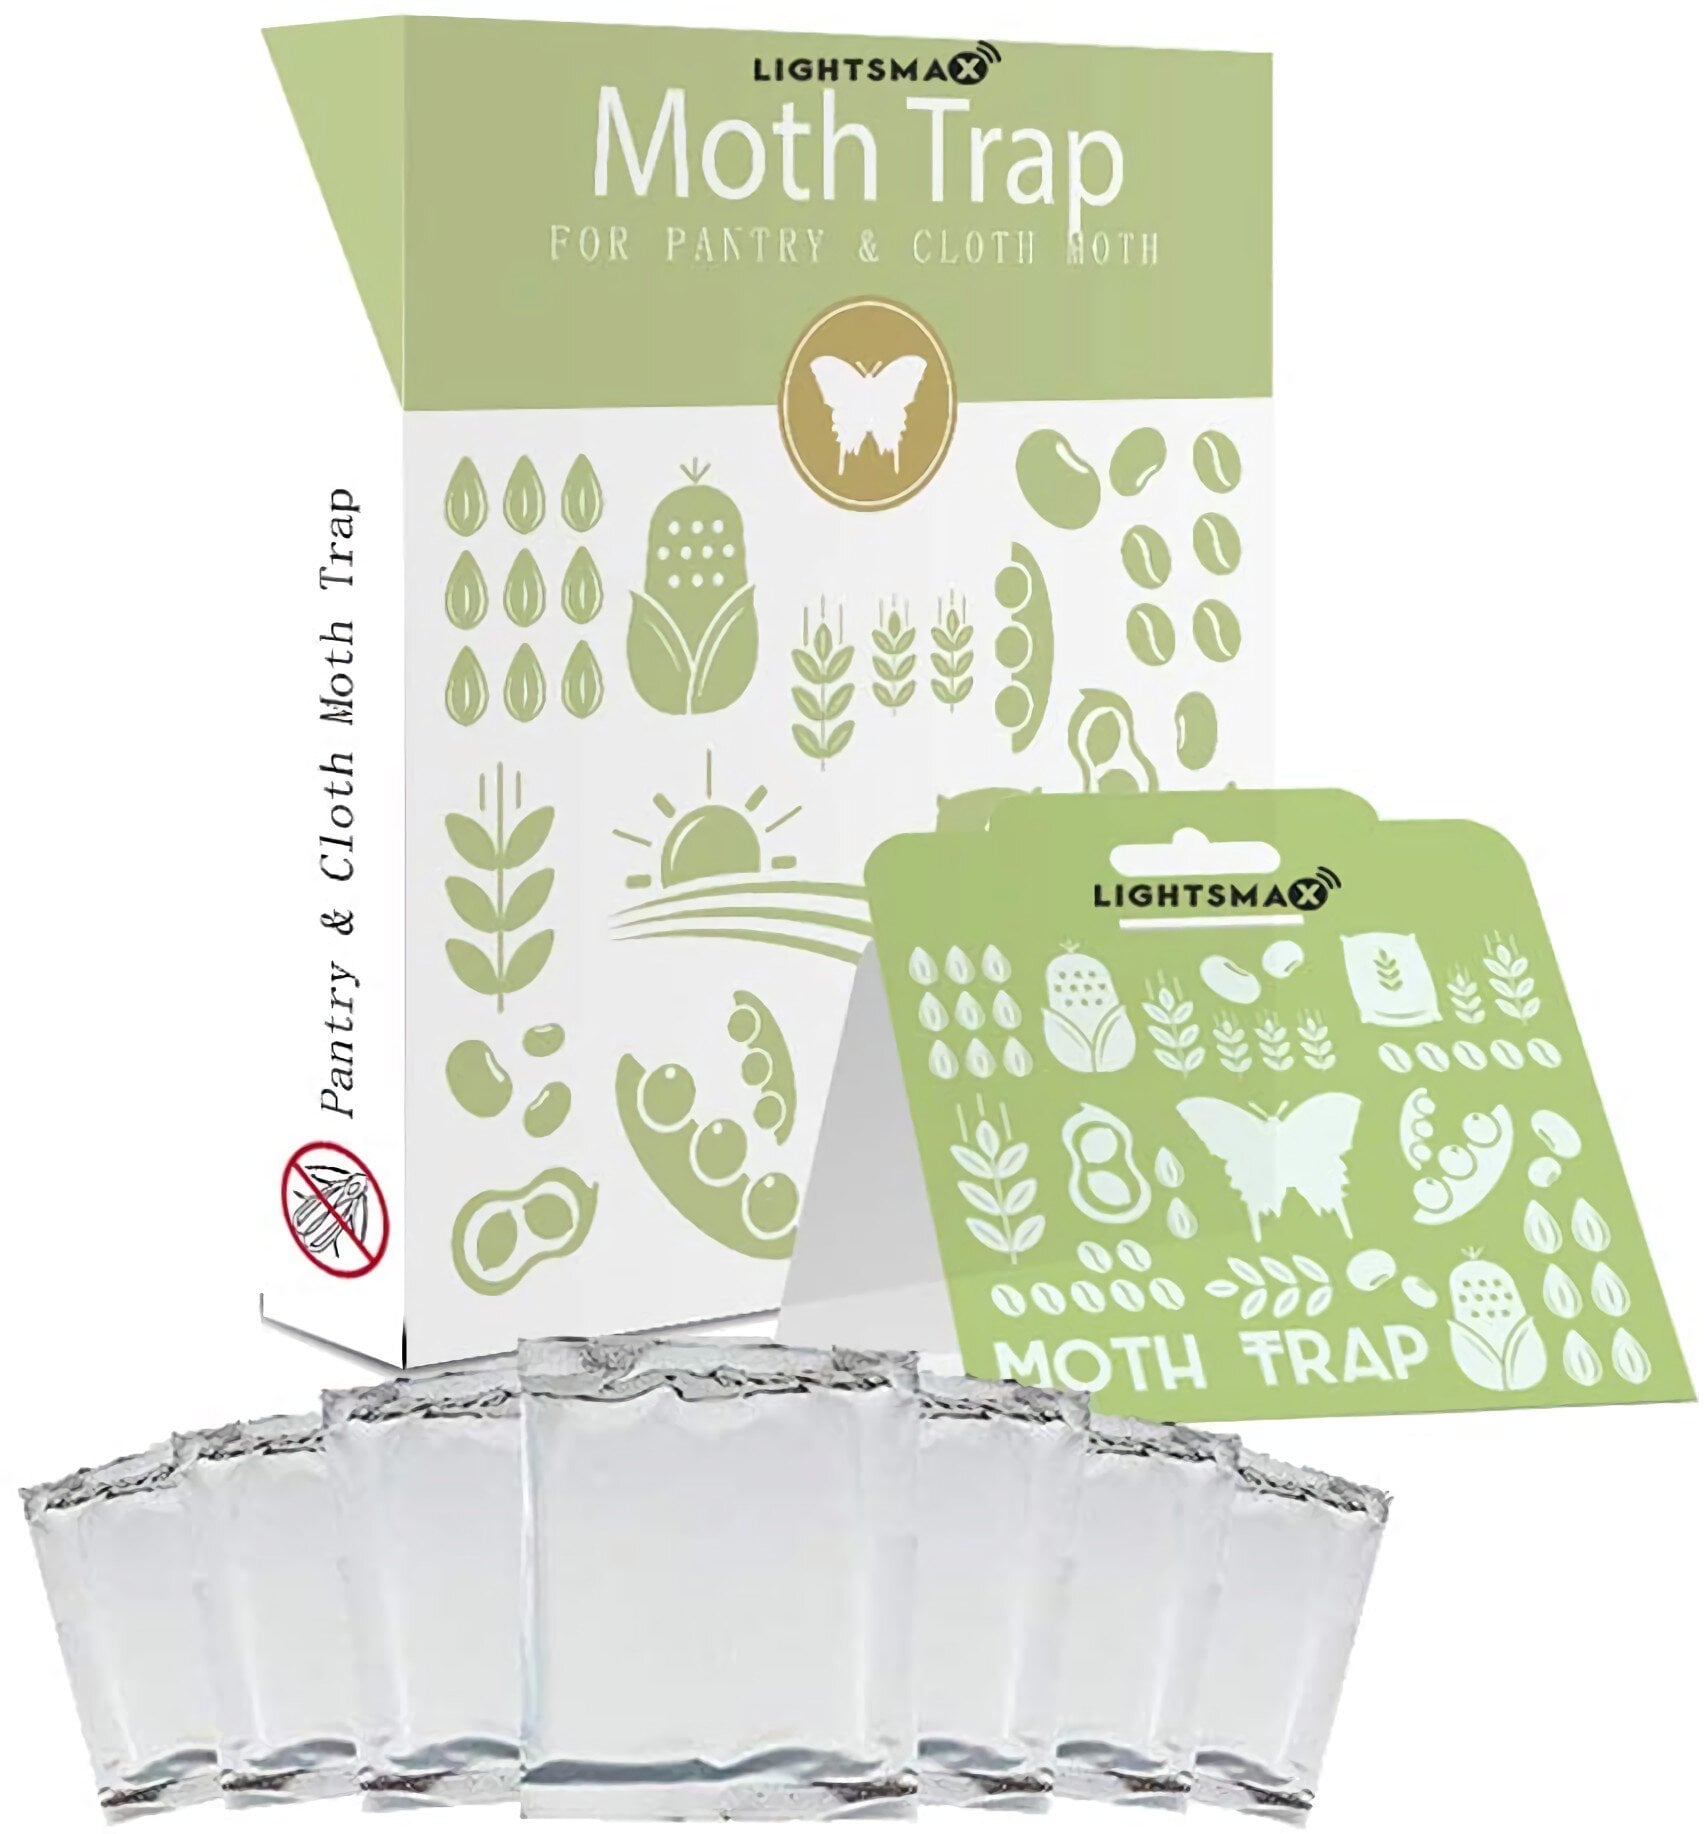 Enoz BioCare Flour and Pantry Moth Traps, Attracts and Kills Food Moths, 2  Count, 4 Pack